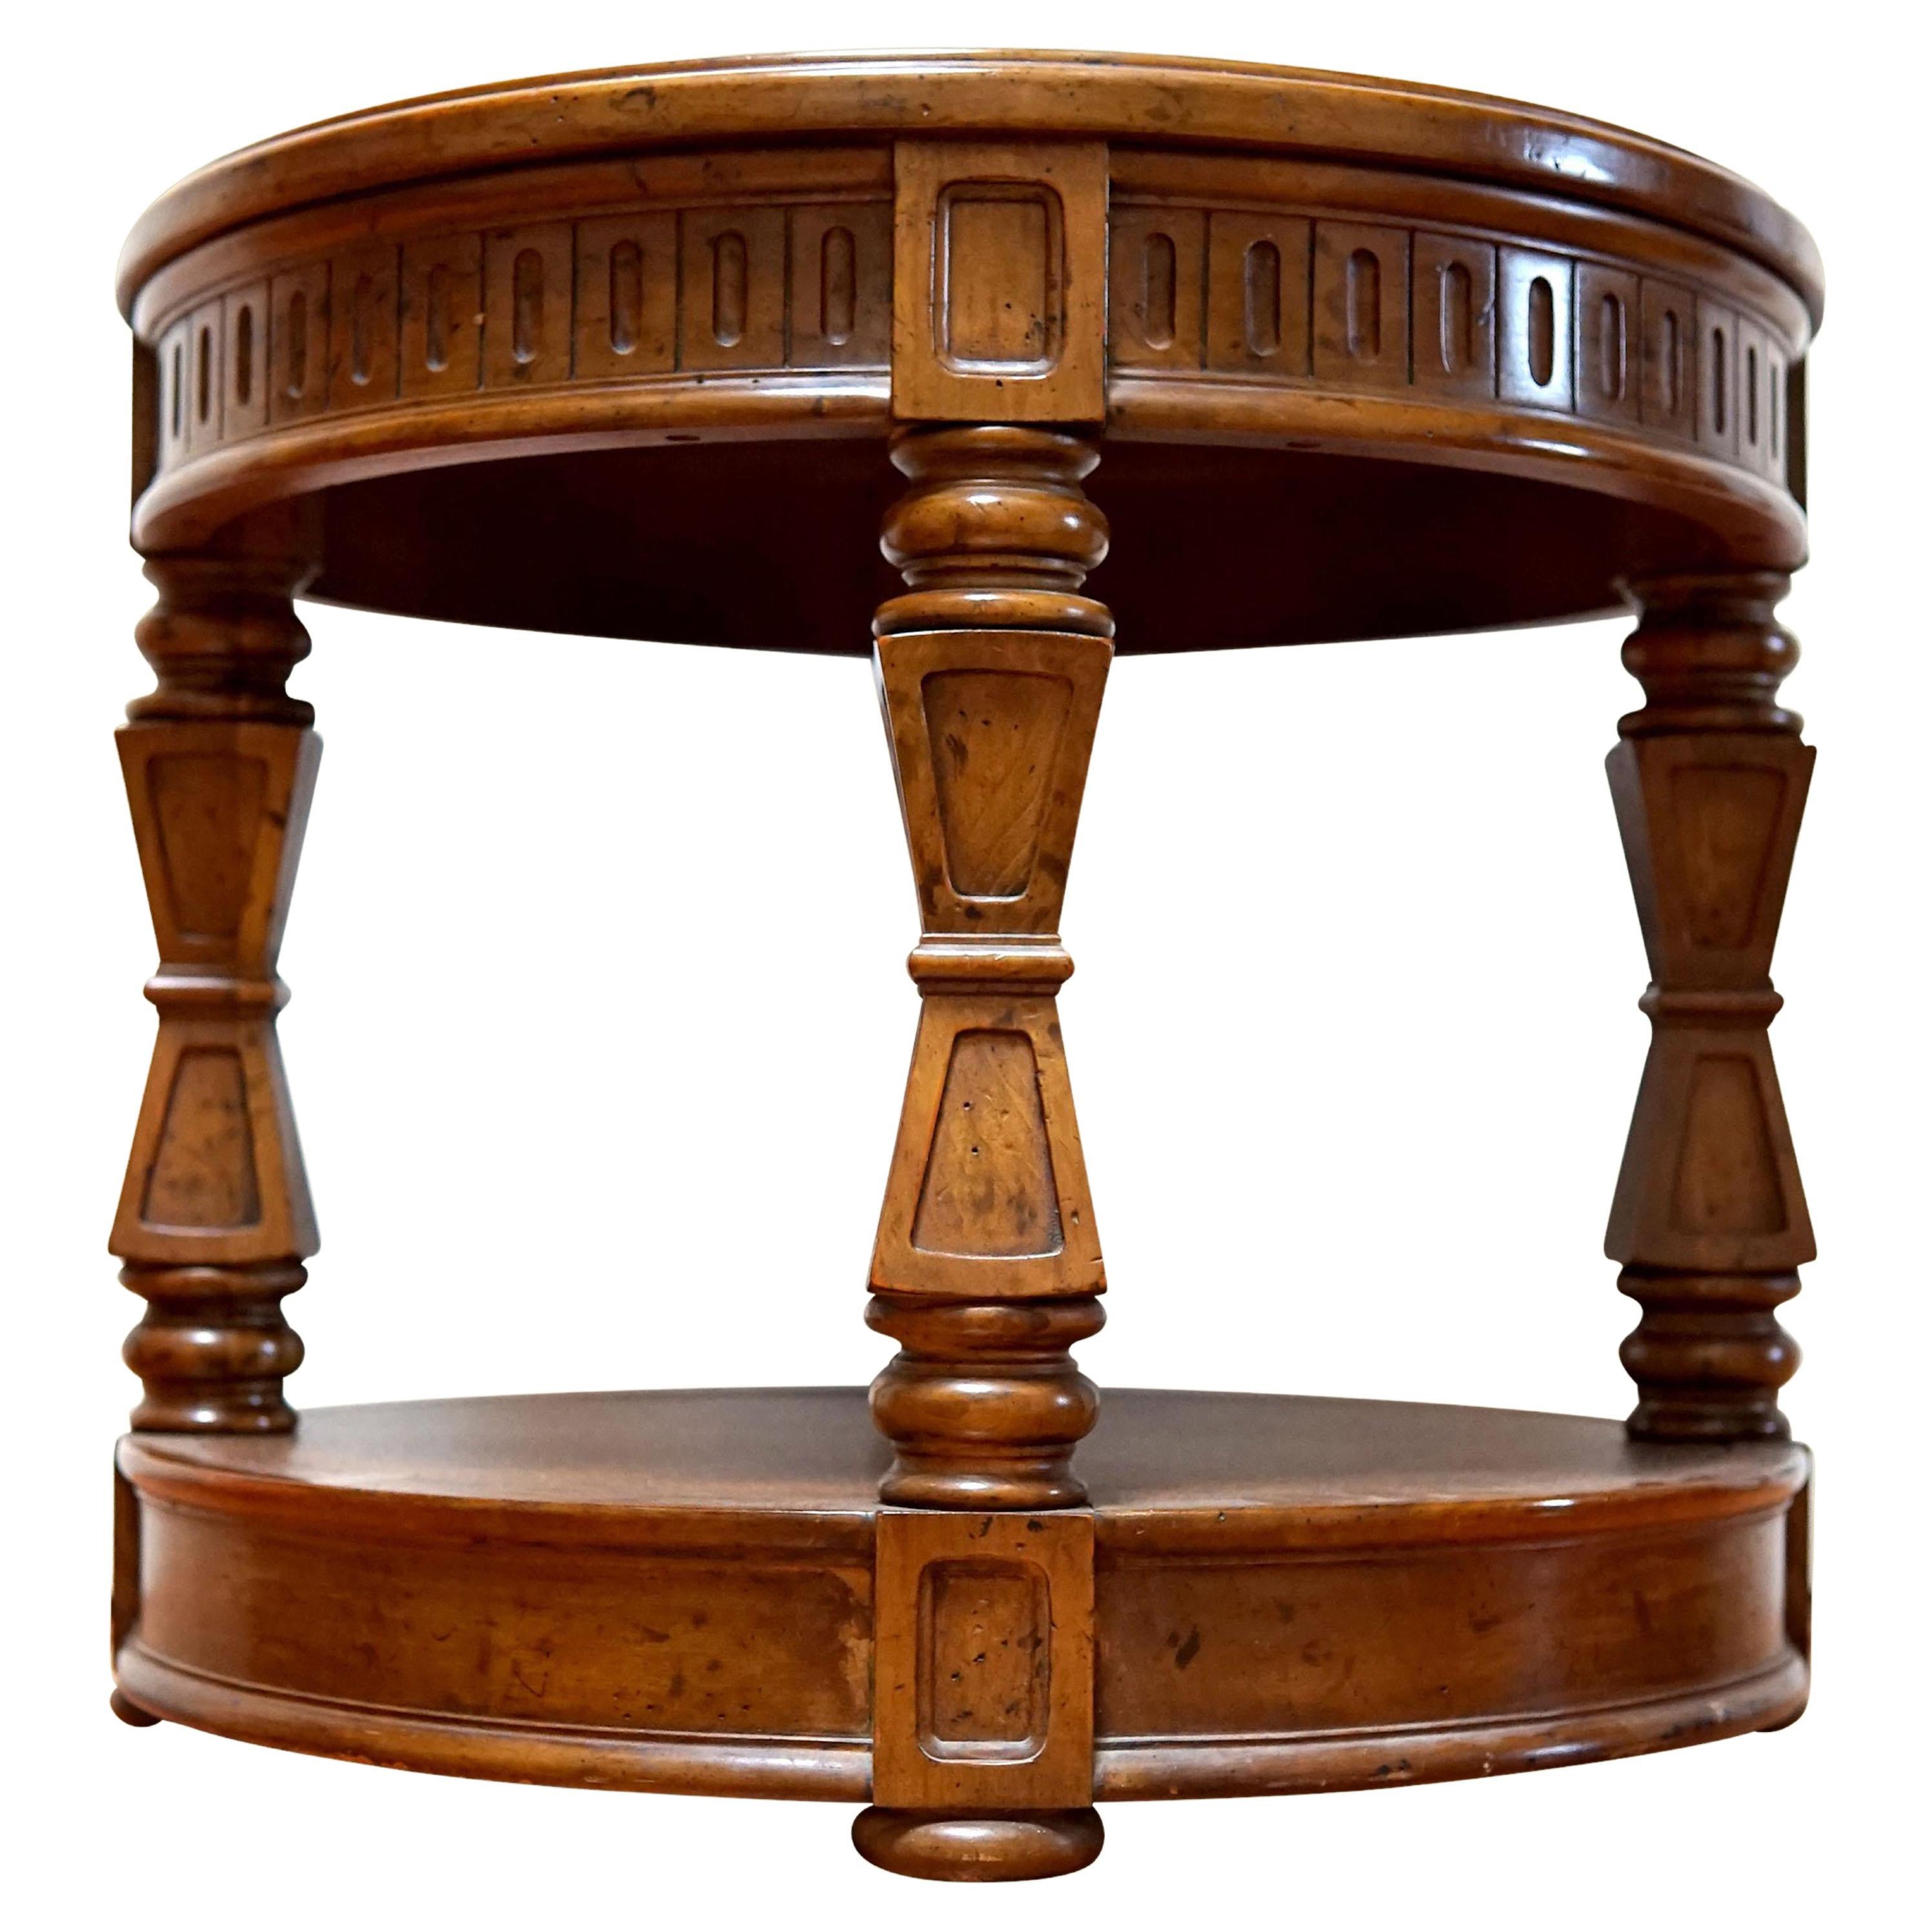 This is a beautiful circular side table marked 